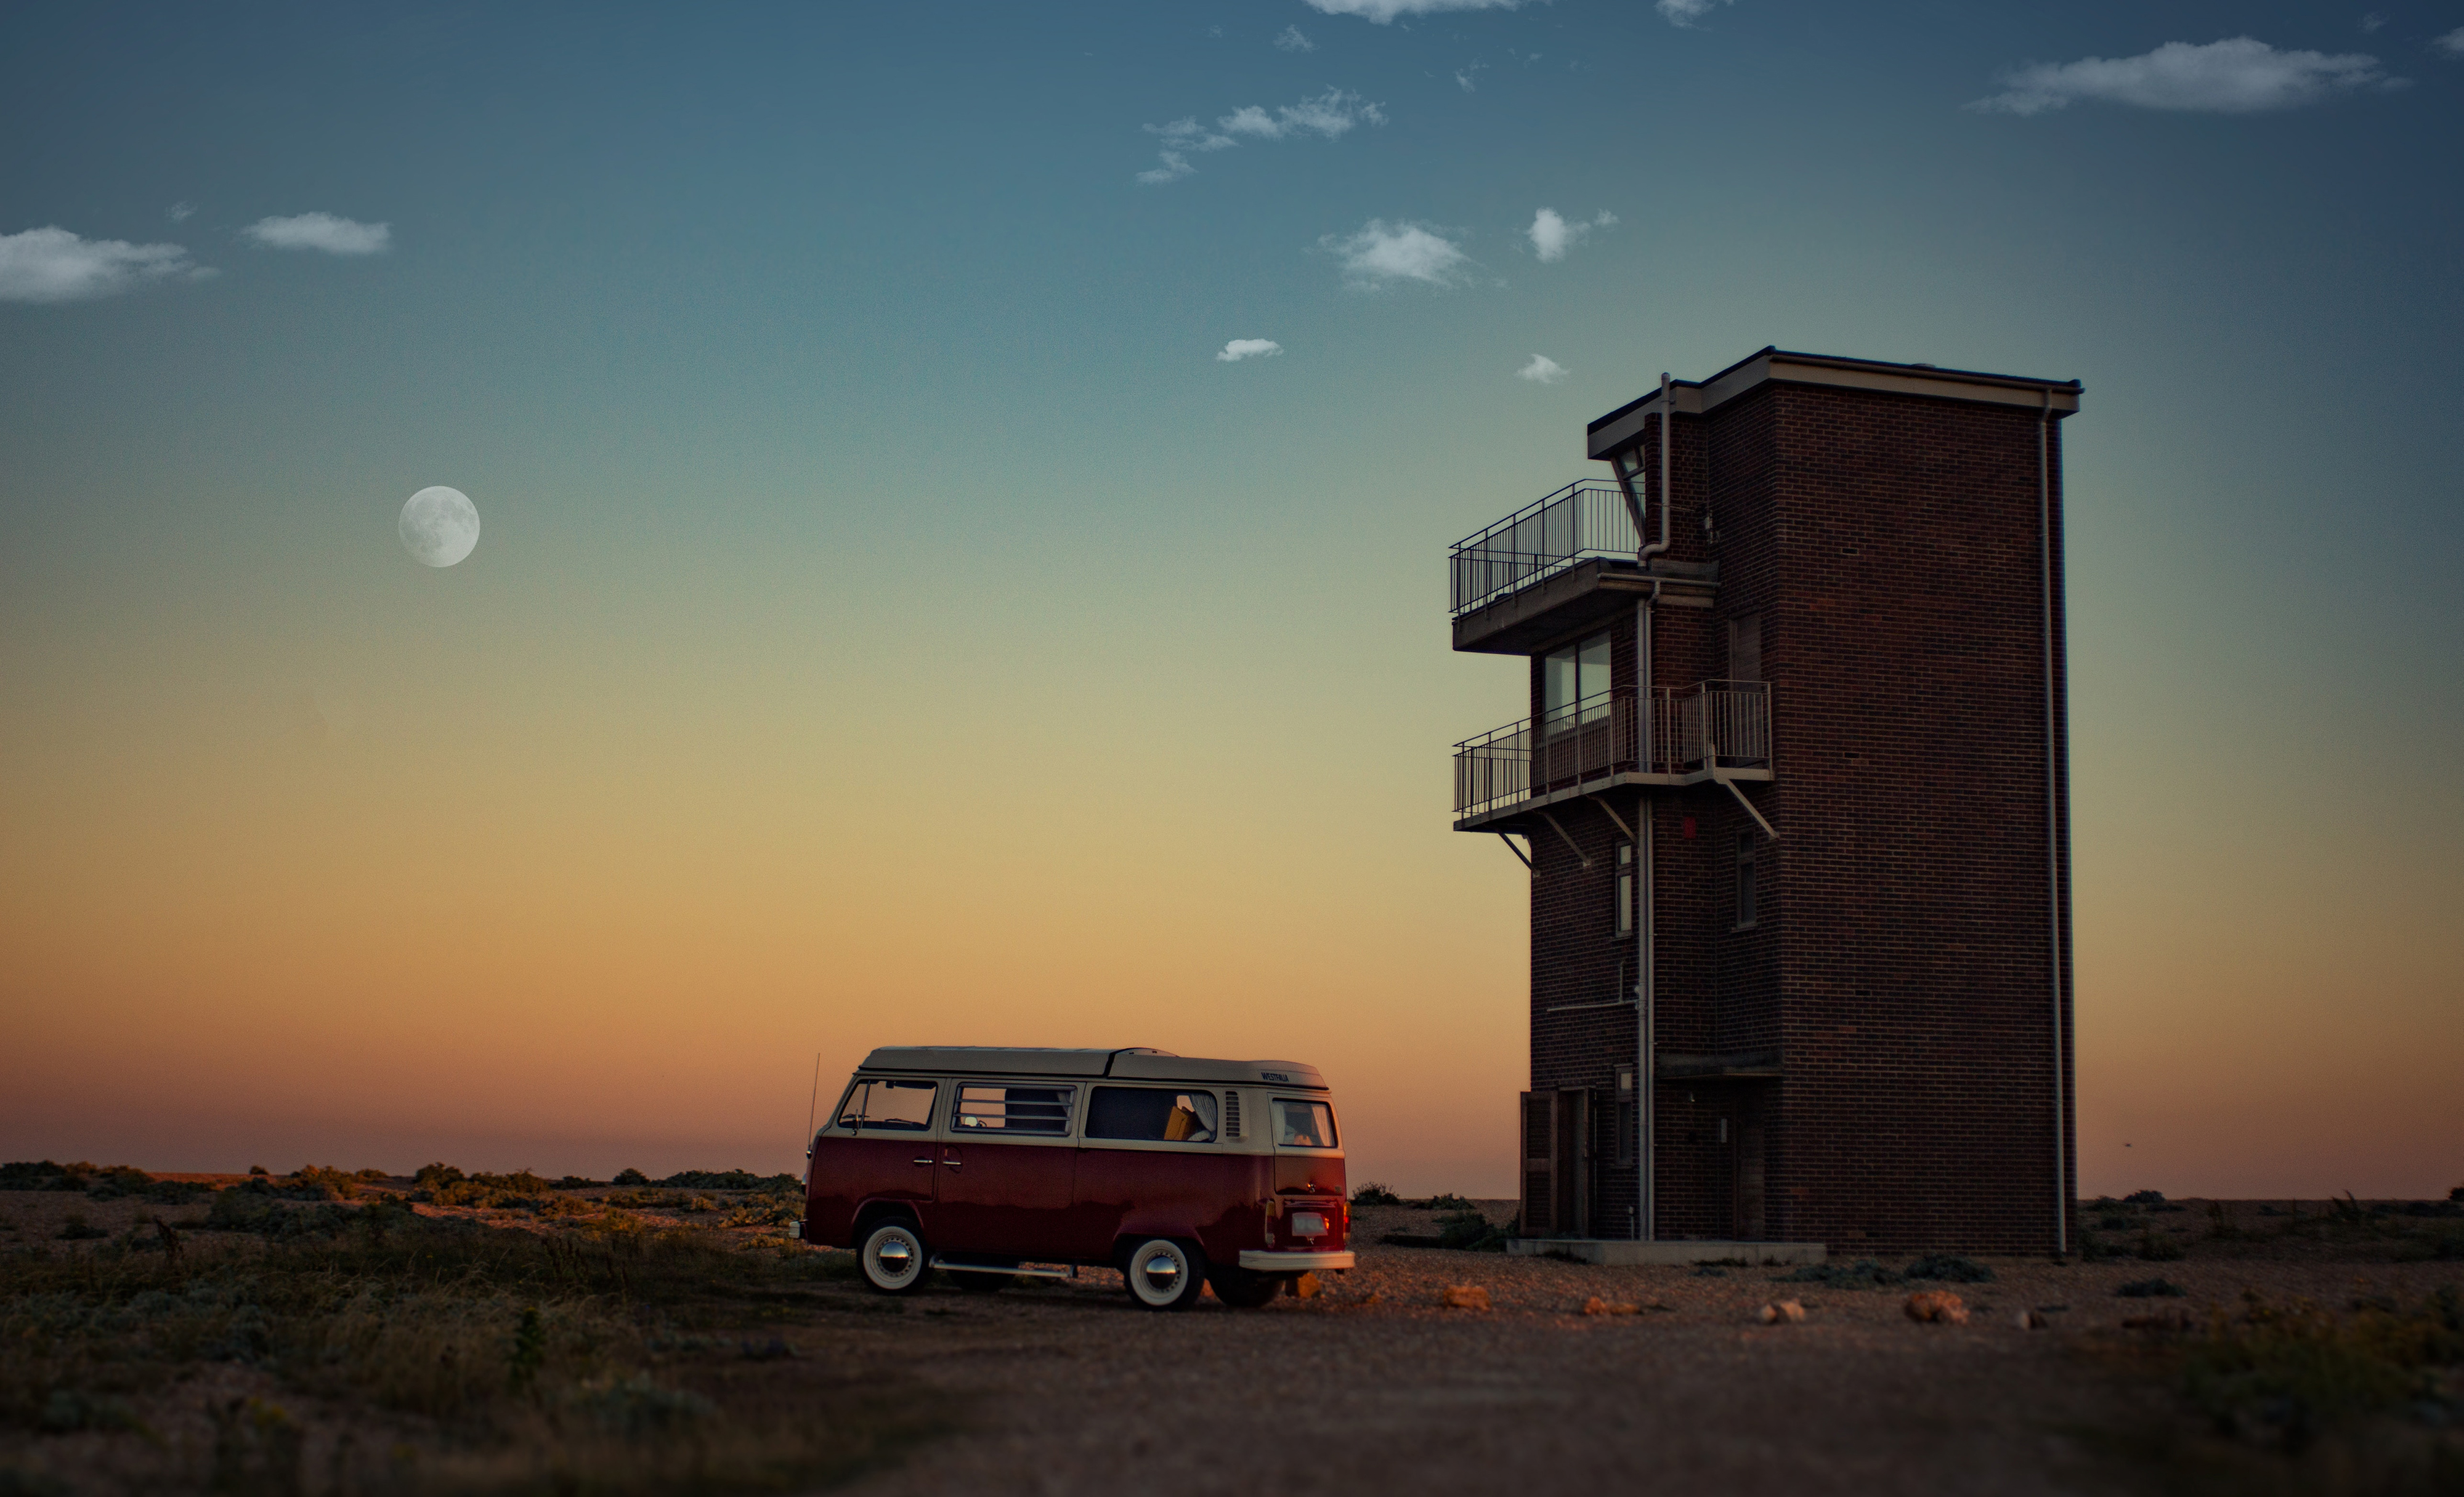 Photo called 'Feel the freedom' in Dungeness, United Kingdom, displaying a red Volkswagen Samba parked near brown house.